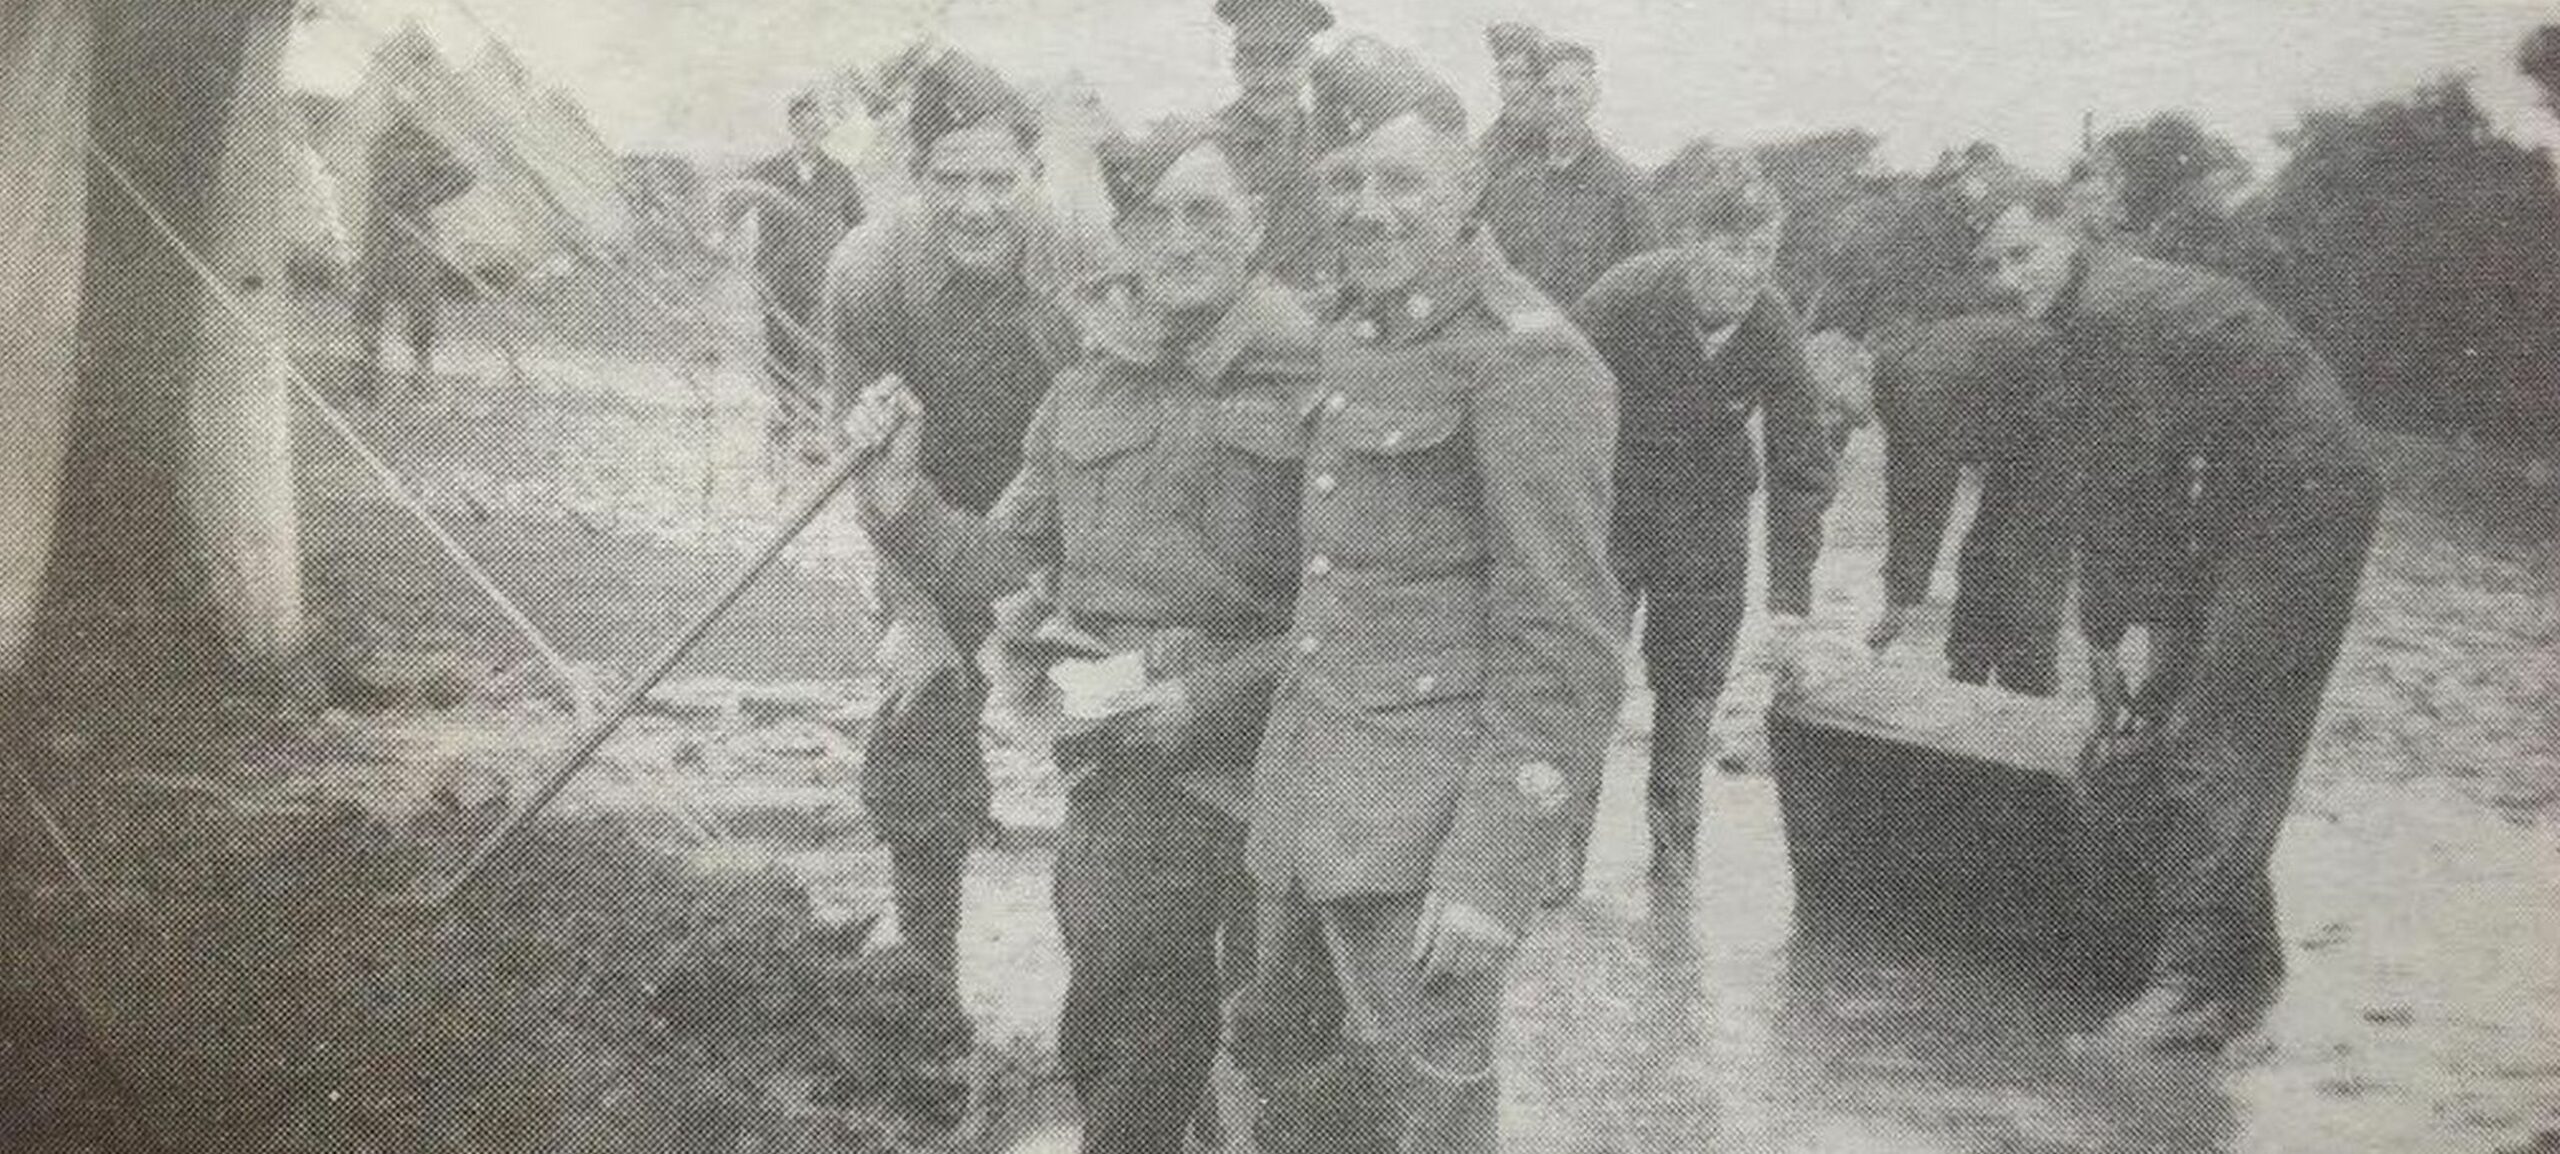 Members of the 538 (Petrol) Company clearing up after a deluge on their camp in the Gower. It was taken just before mobilisation. In the foreground are CSM Joe Bromilow and Sgt Harold Guest. In the far right is Harold Ainscough of Birkdale and David Hayward is in the background right with a shovel. Mr Hayward recalled: "We always left from the Hesketh Arms, Churchtown, when we went anywhere, the landlady was an honorary member of the unit." Photo: David Hayward